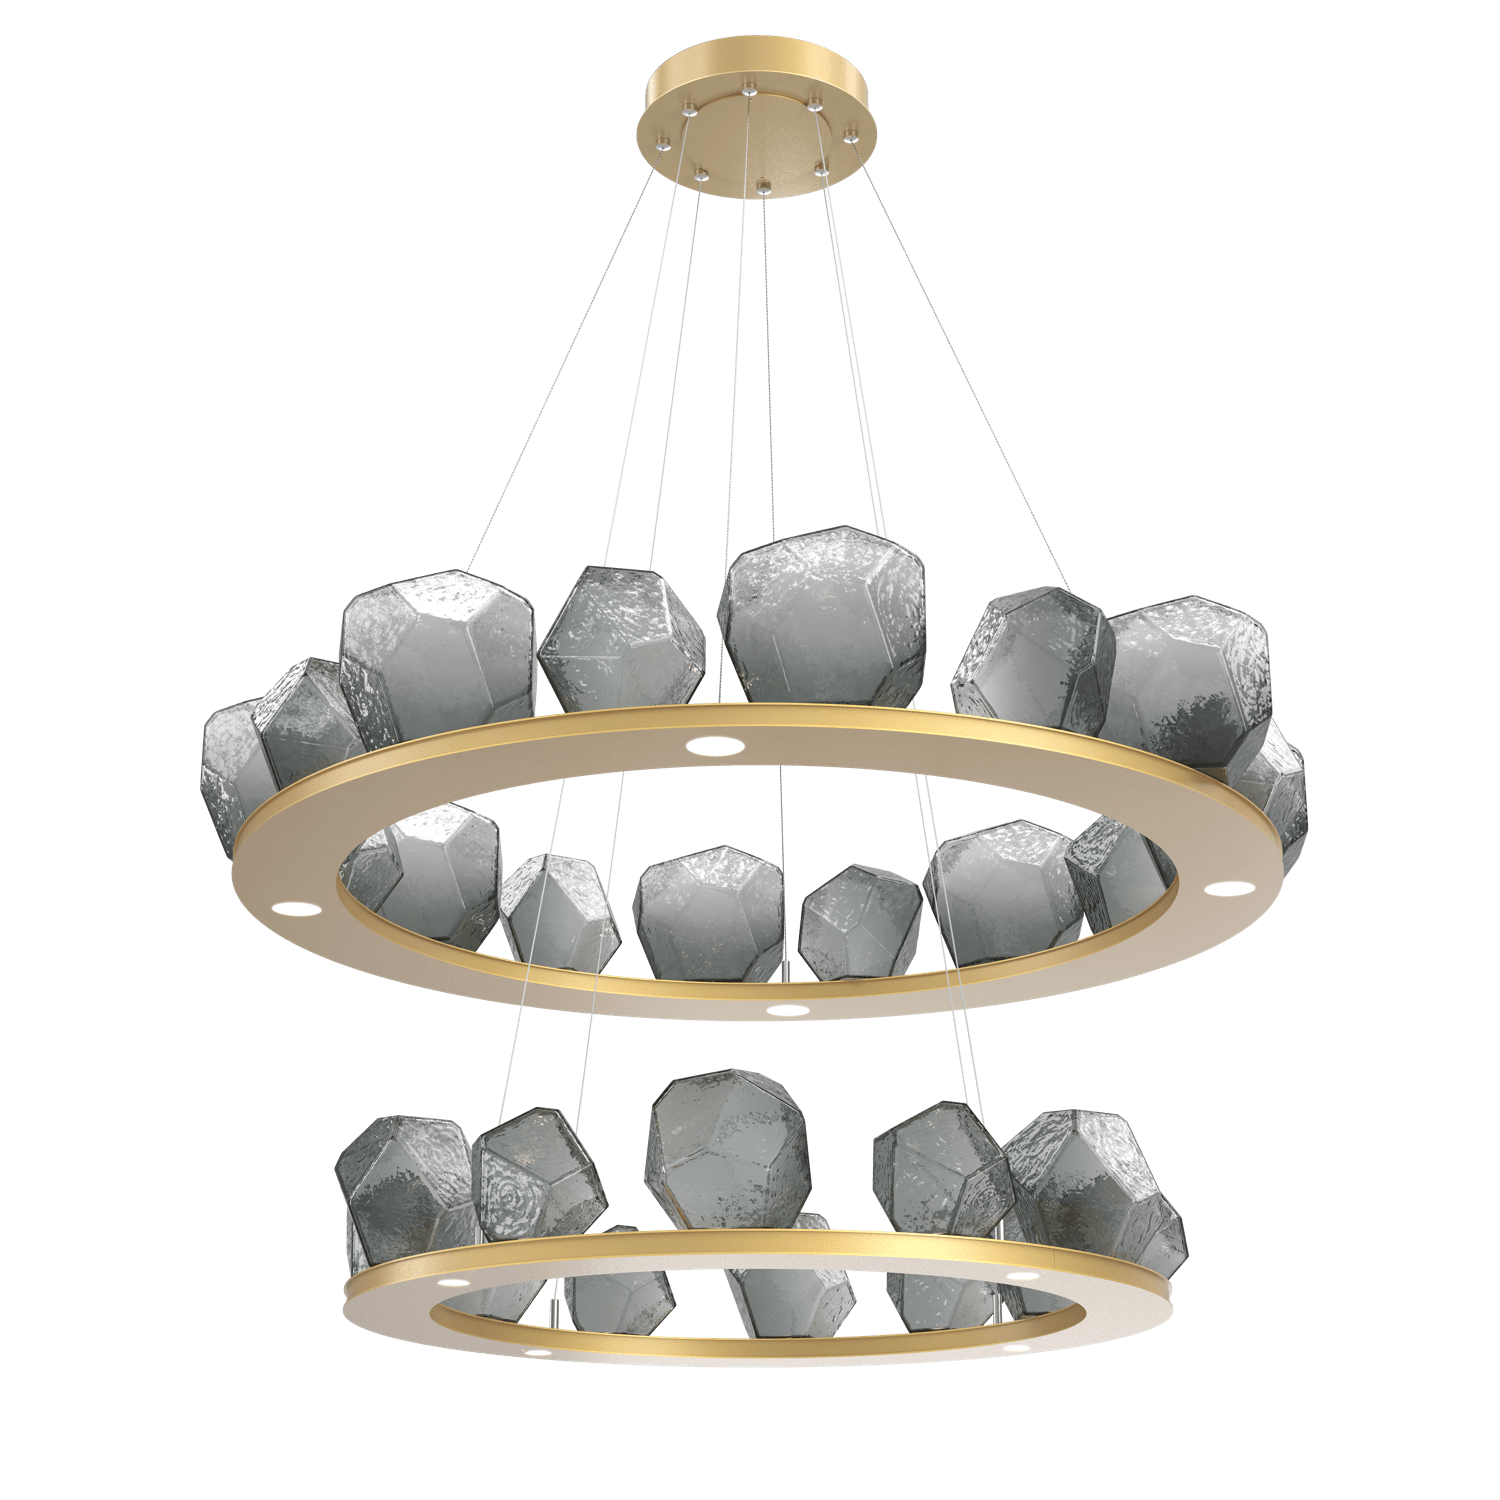 CHB0039-2B-GB-S-Hammerton-Studio-Gem-48-inch-two-tier-ring-chandelier-with-gilded-brass-finish-and-smoke-blown-glass-shades-and-LED-lamping